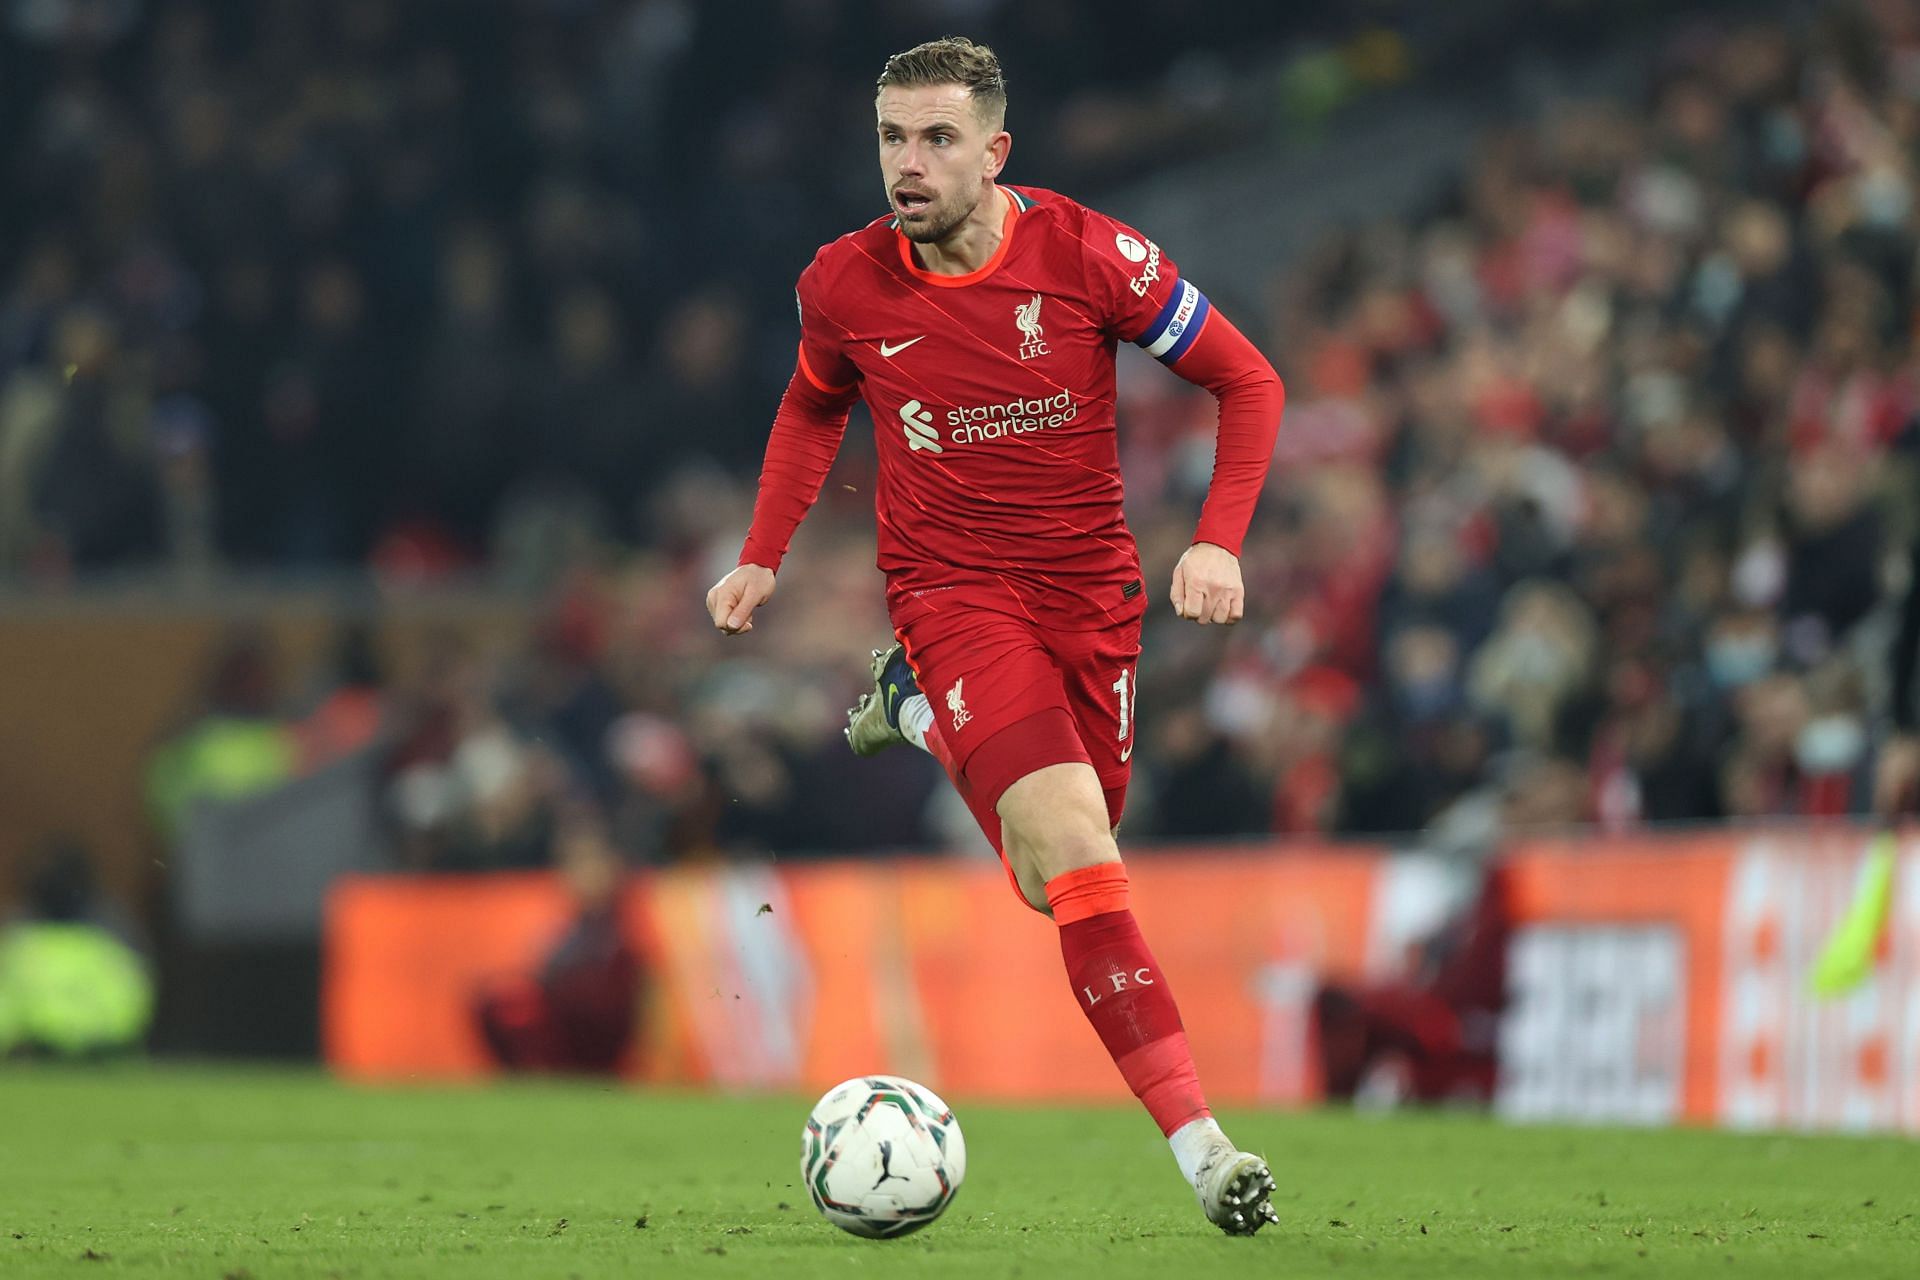 Jordan Henderson has been at Anfield for more than a decade